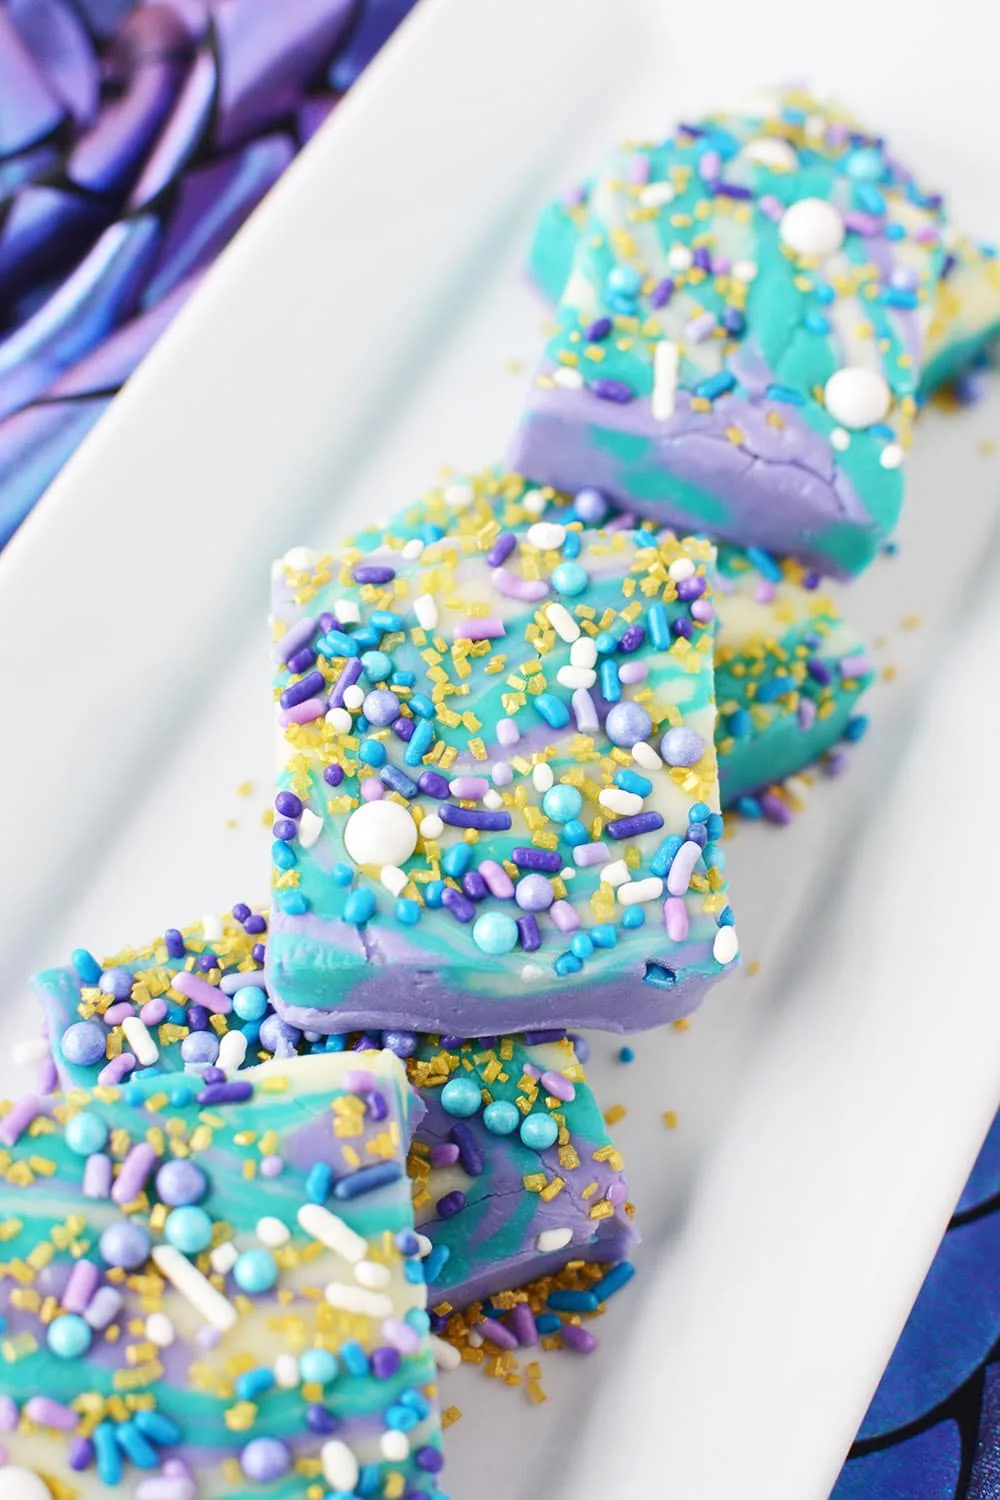 Mermaid candy fudge cut into squares on a plate.